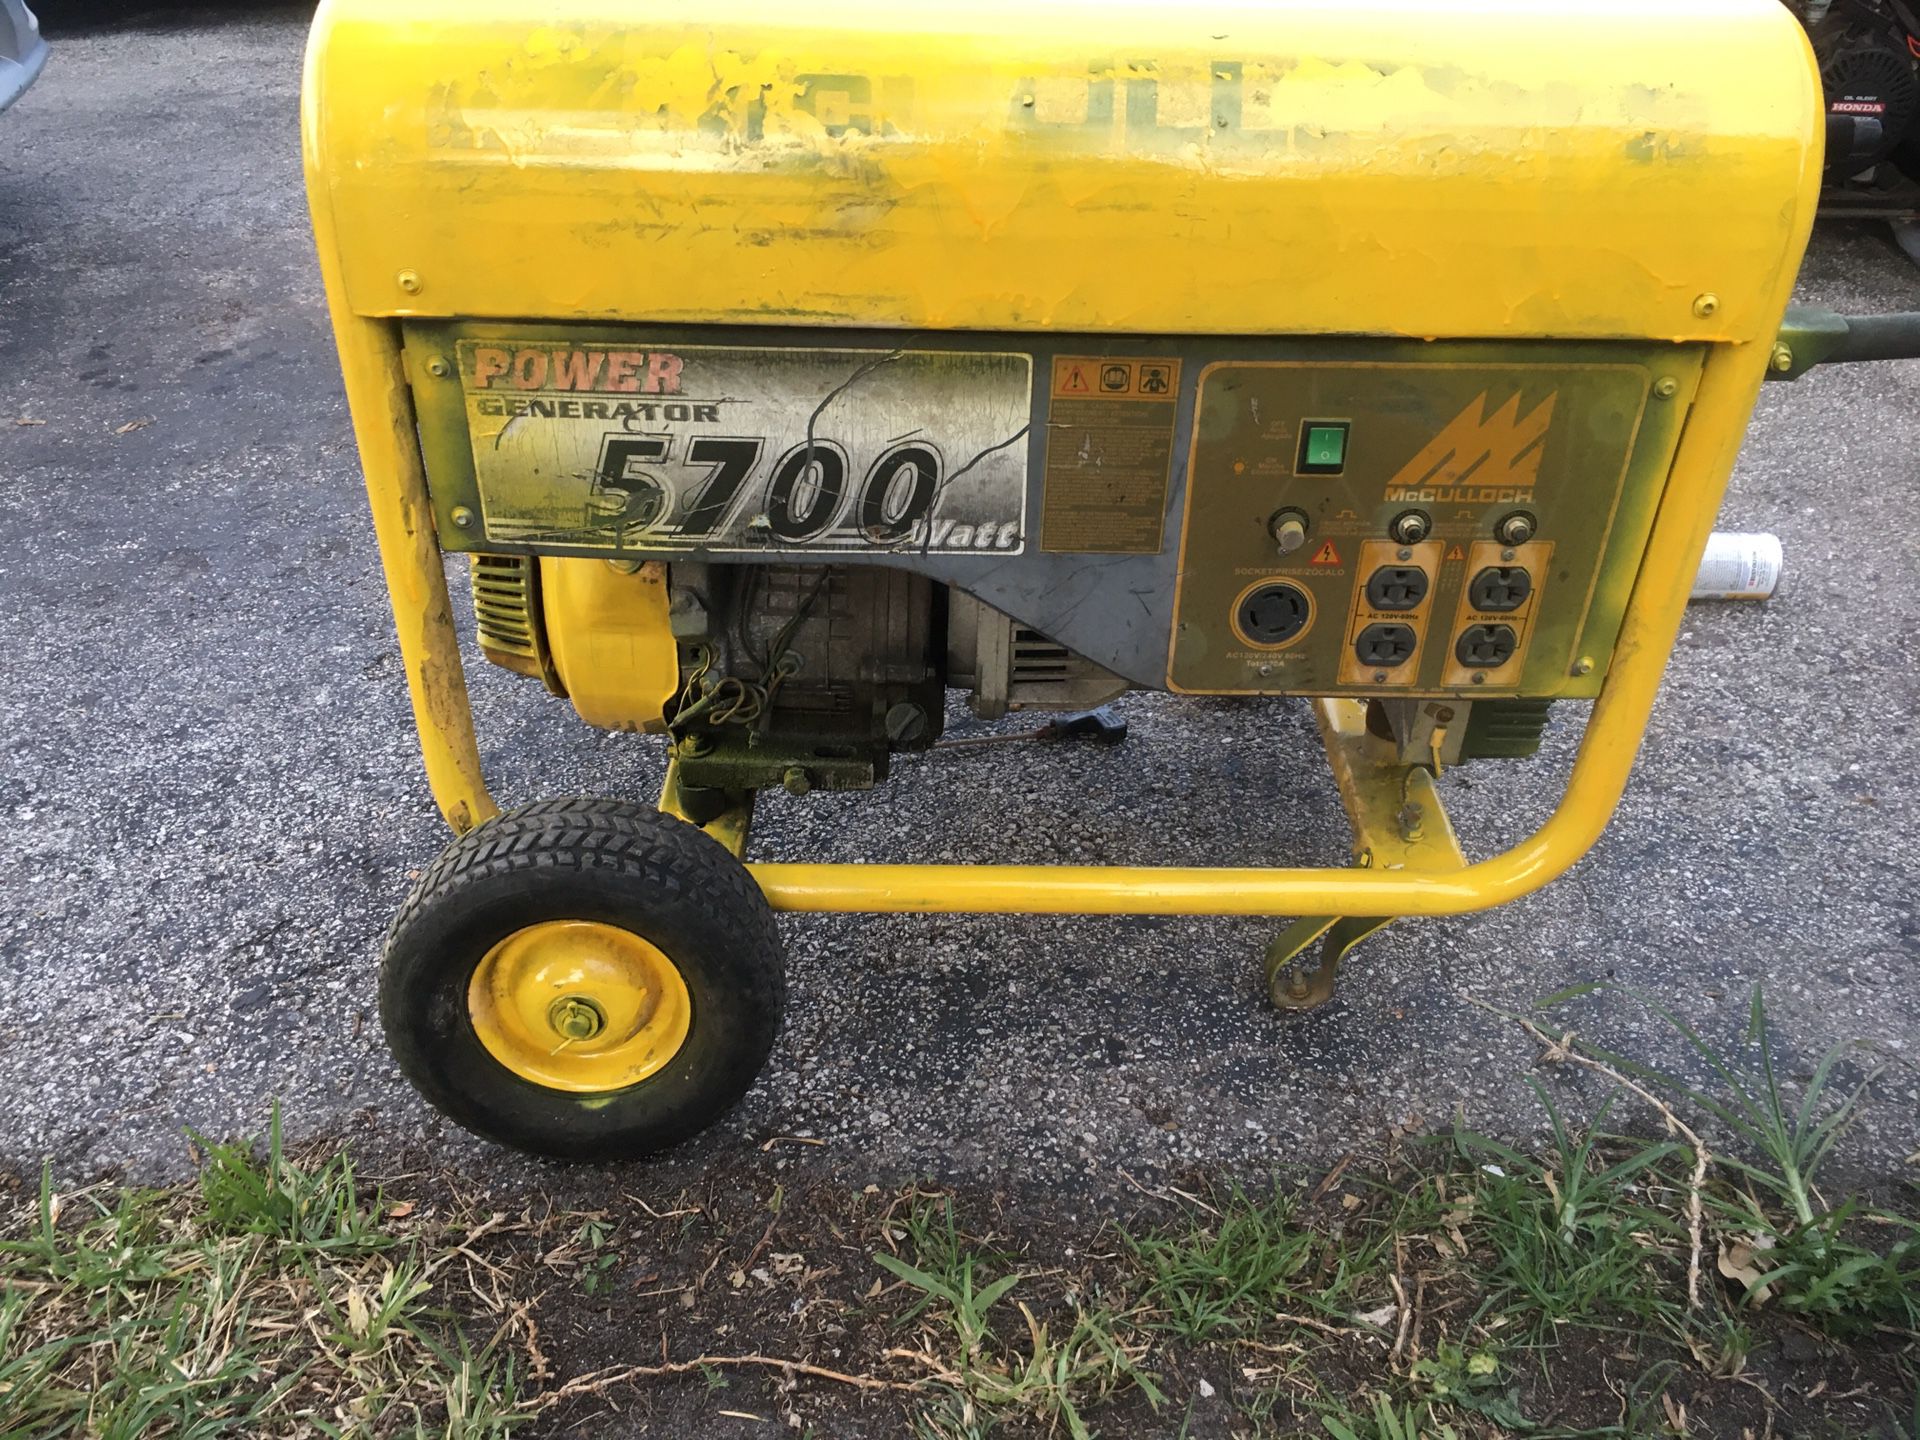 GENERATOR- Amazing Branded 5700 Watts Generator [Brand: McCULLOCH] WORKS GREAT/ 375 FIRM (NO OFFERS PLEASE)